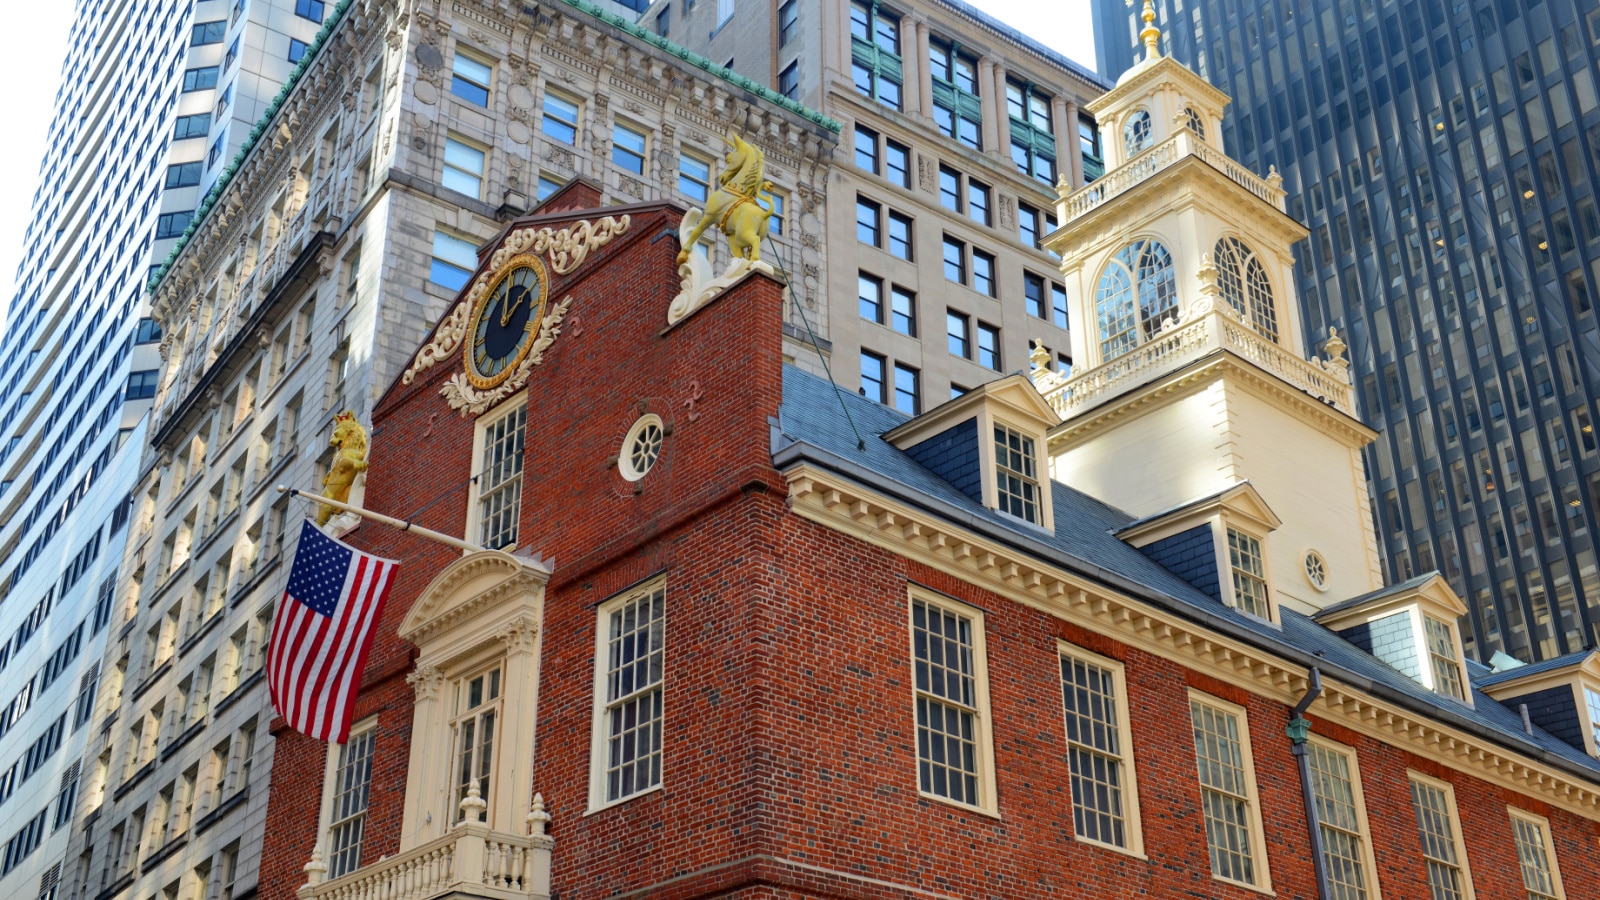 Old State House in downtown Boston, Massachusetts, USA